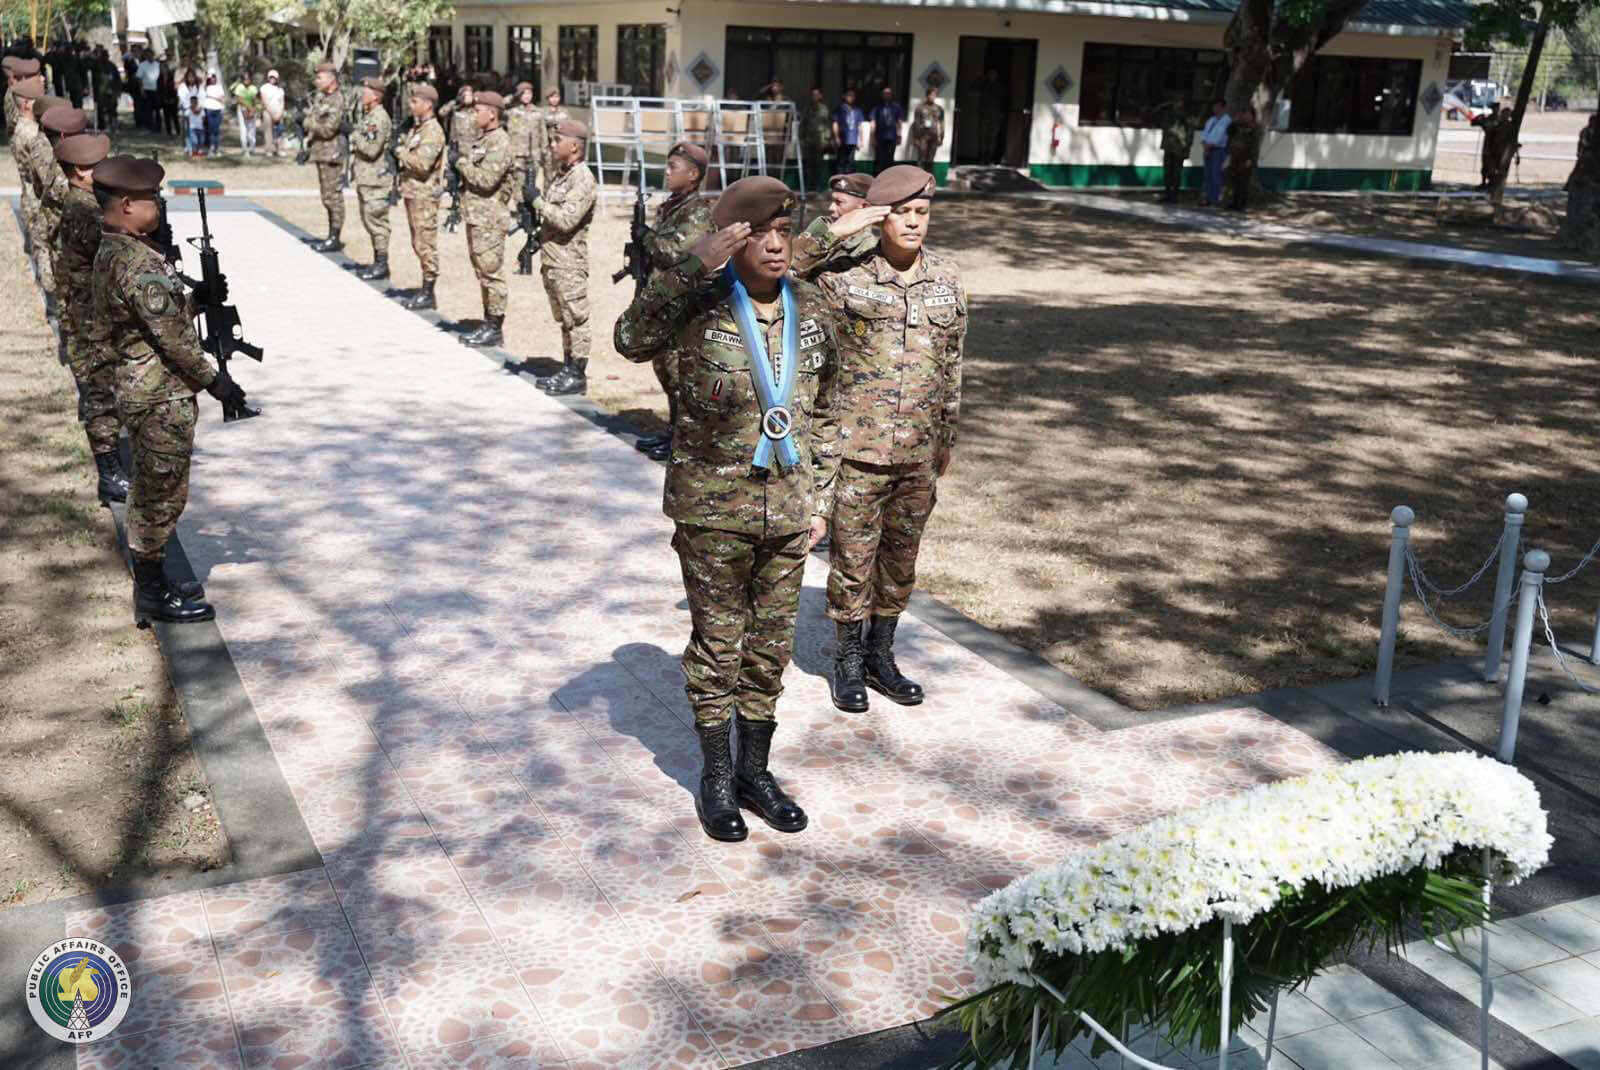 AFP Chief of Staff commends SOCOM troop members for their unwavering commitment to service